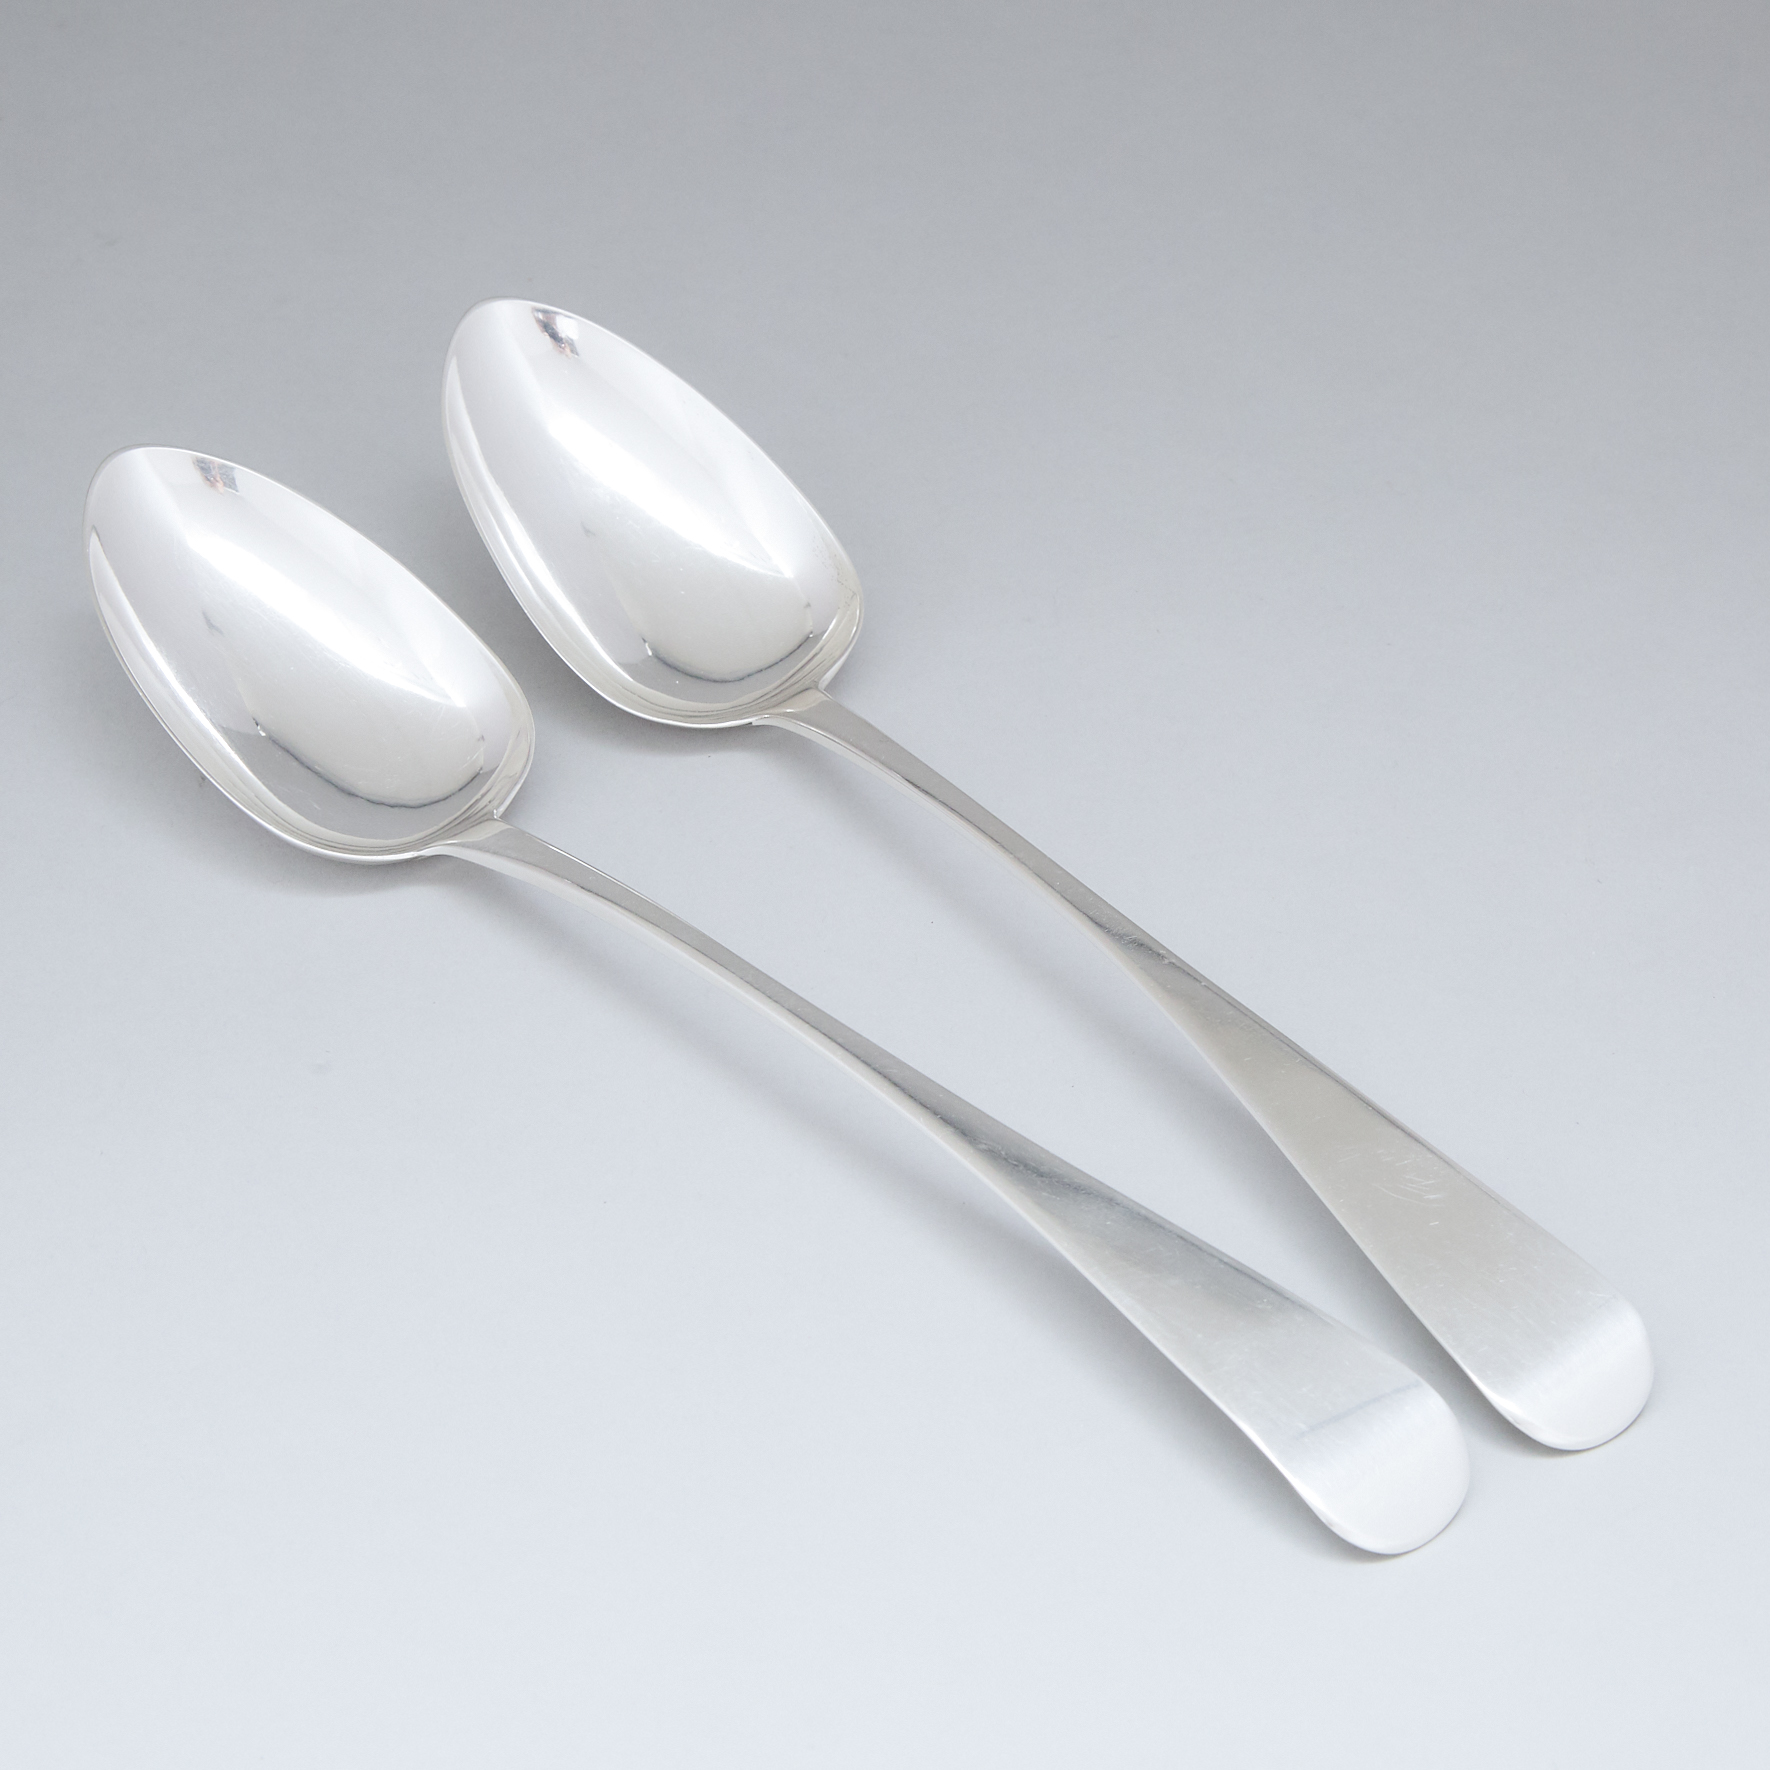 Pair of George IV Silver Old English Pattern Serving Spoons, William Welch II, Exeter, 1821/25